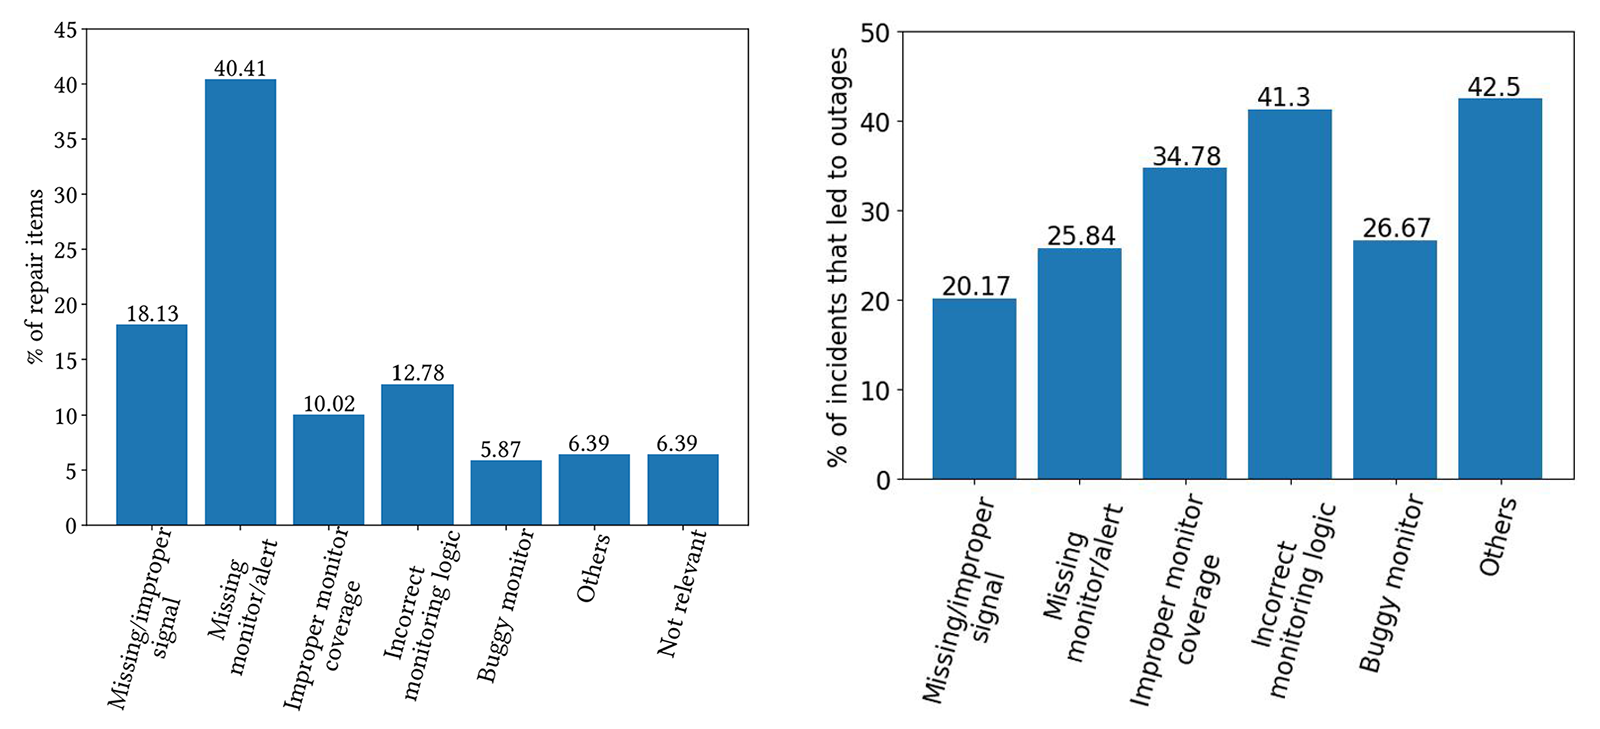 On the left is a bar chart illustrating the major classes of incident misdetection. On the right is a bar chart showing the proportion of incidents from each miss detection that lead to outages.